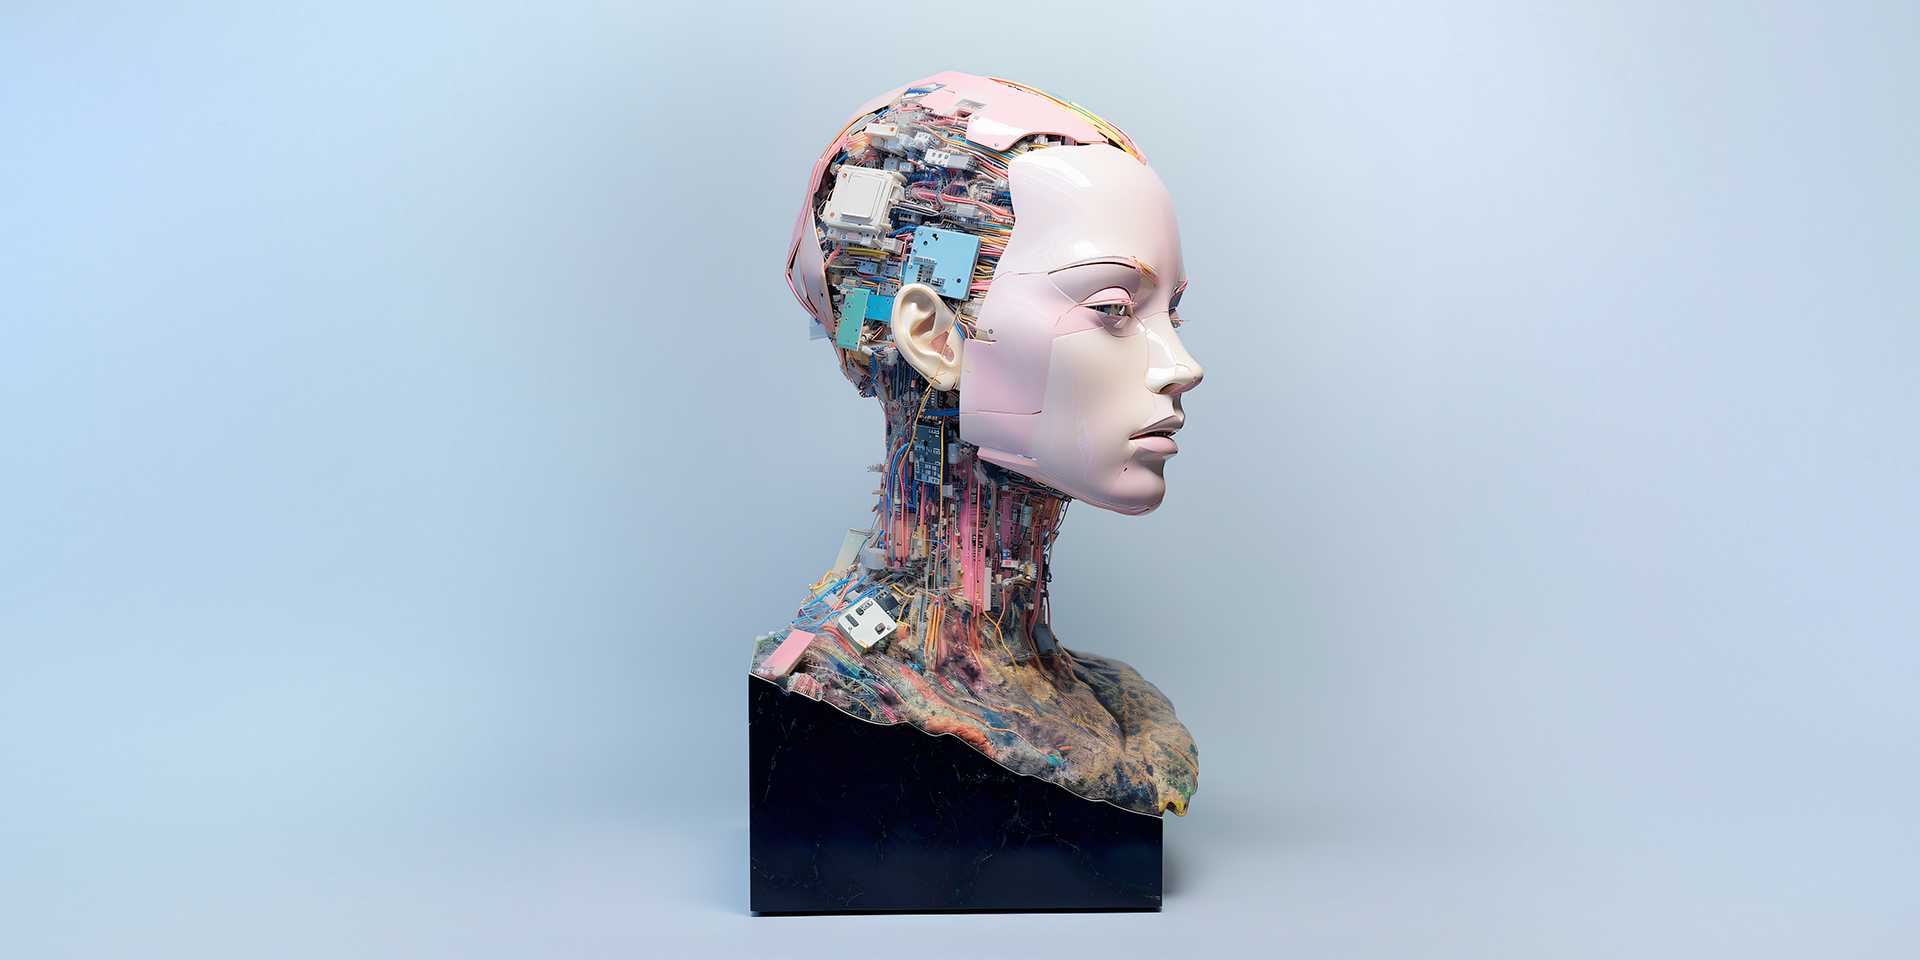 Sculpture of a woman's head in which computer chips can be seen.